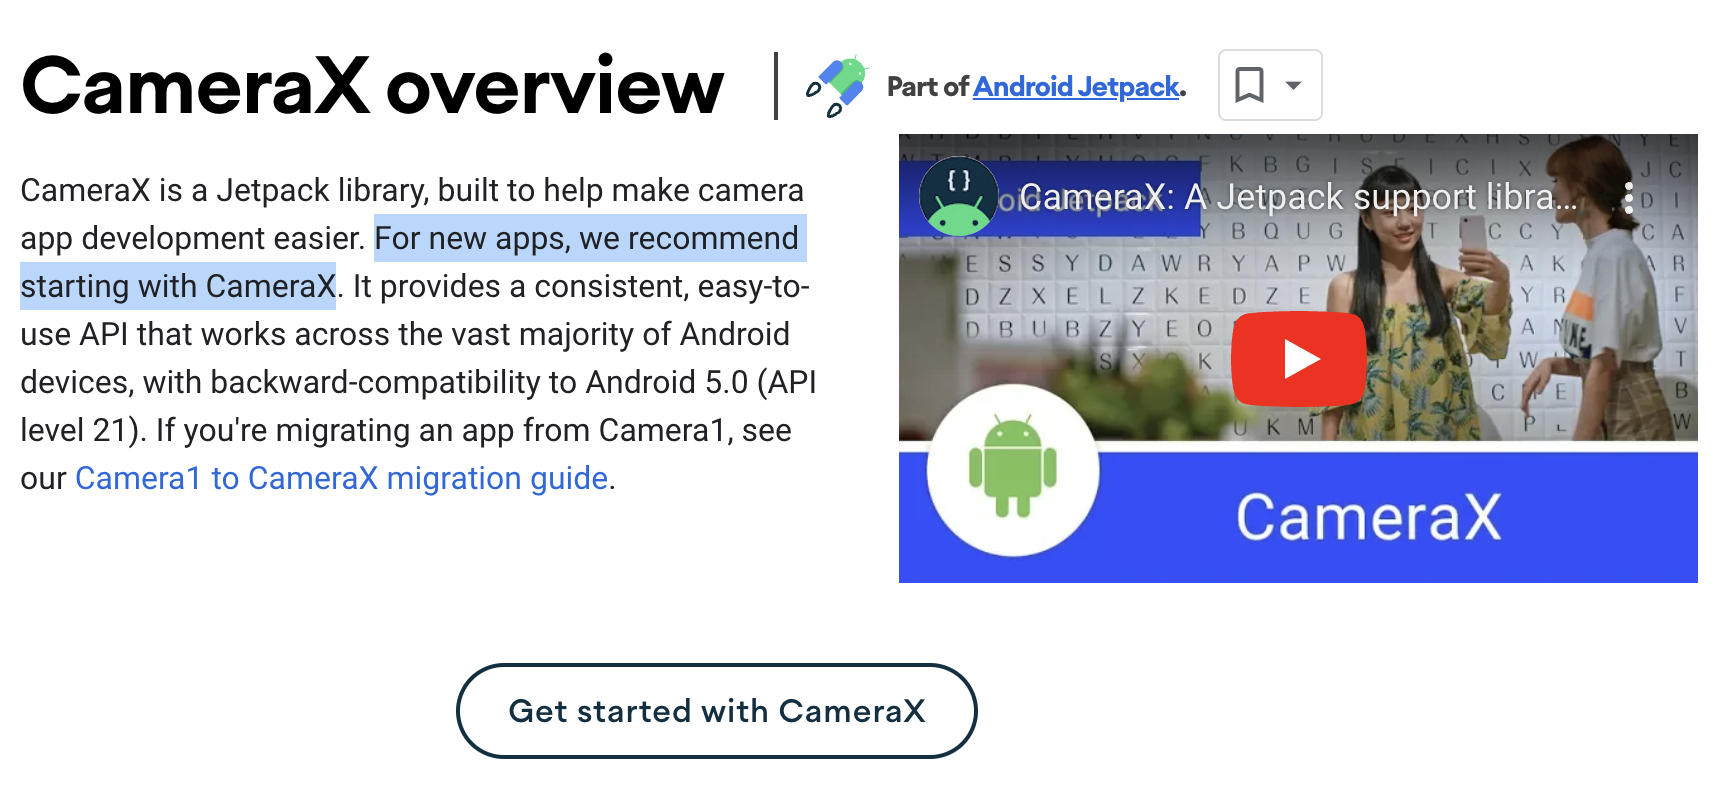 Google saying "For new apps, we recommend starting with CameraX"